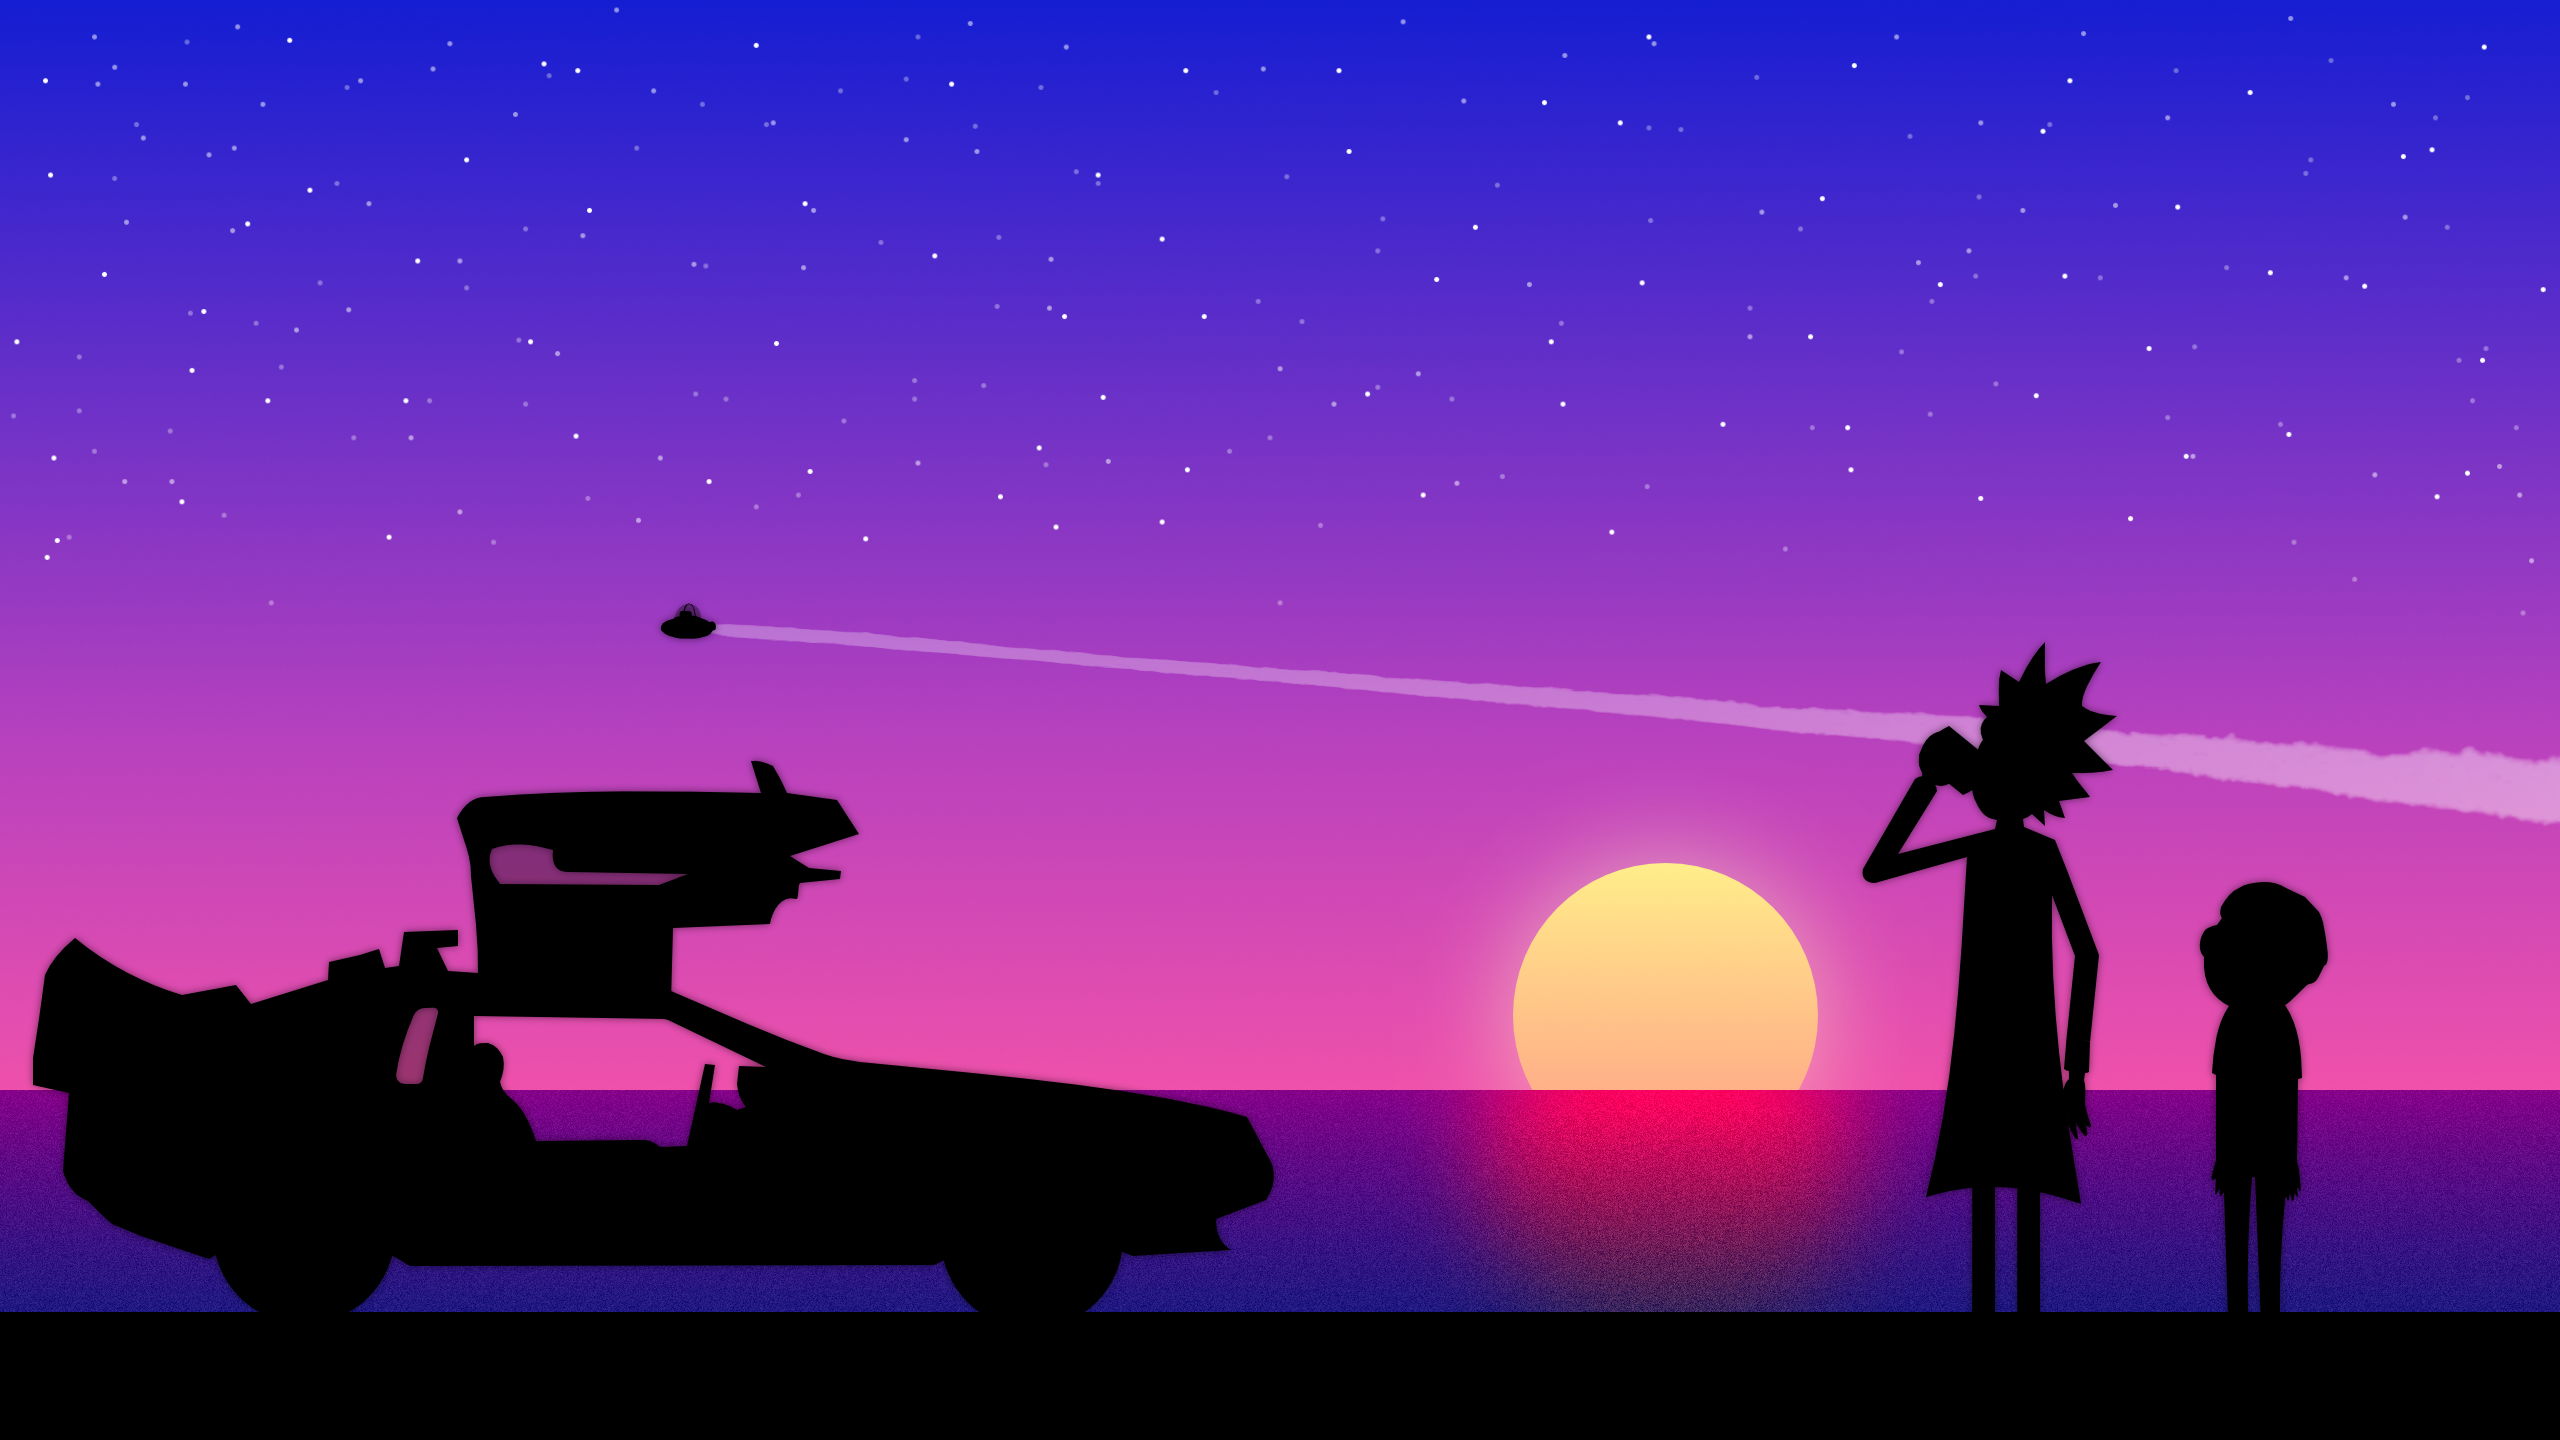 General 2560x1440 Rick and Morty car DeLorean Time Machine sunset silhouette